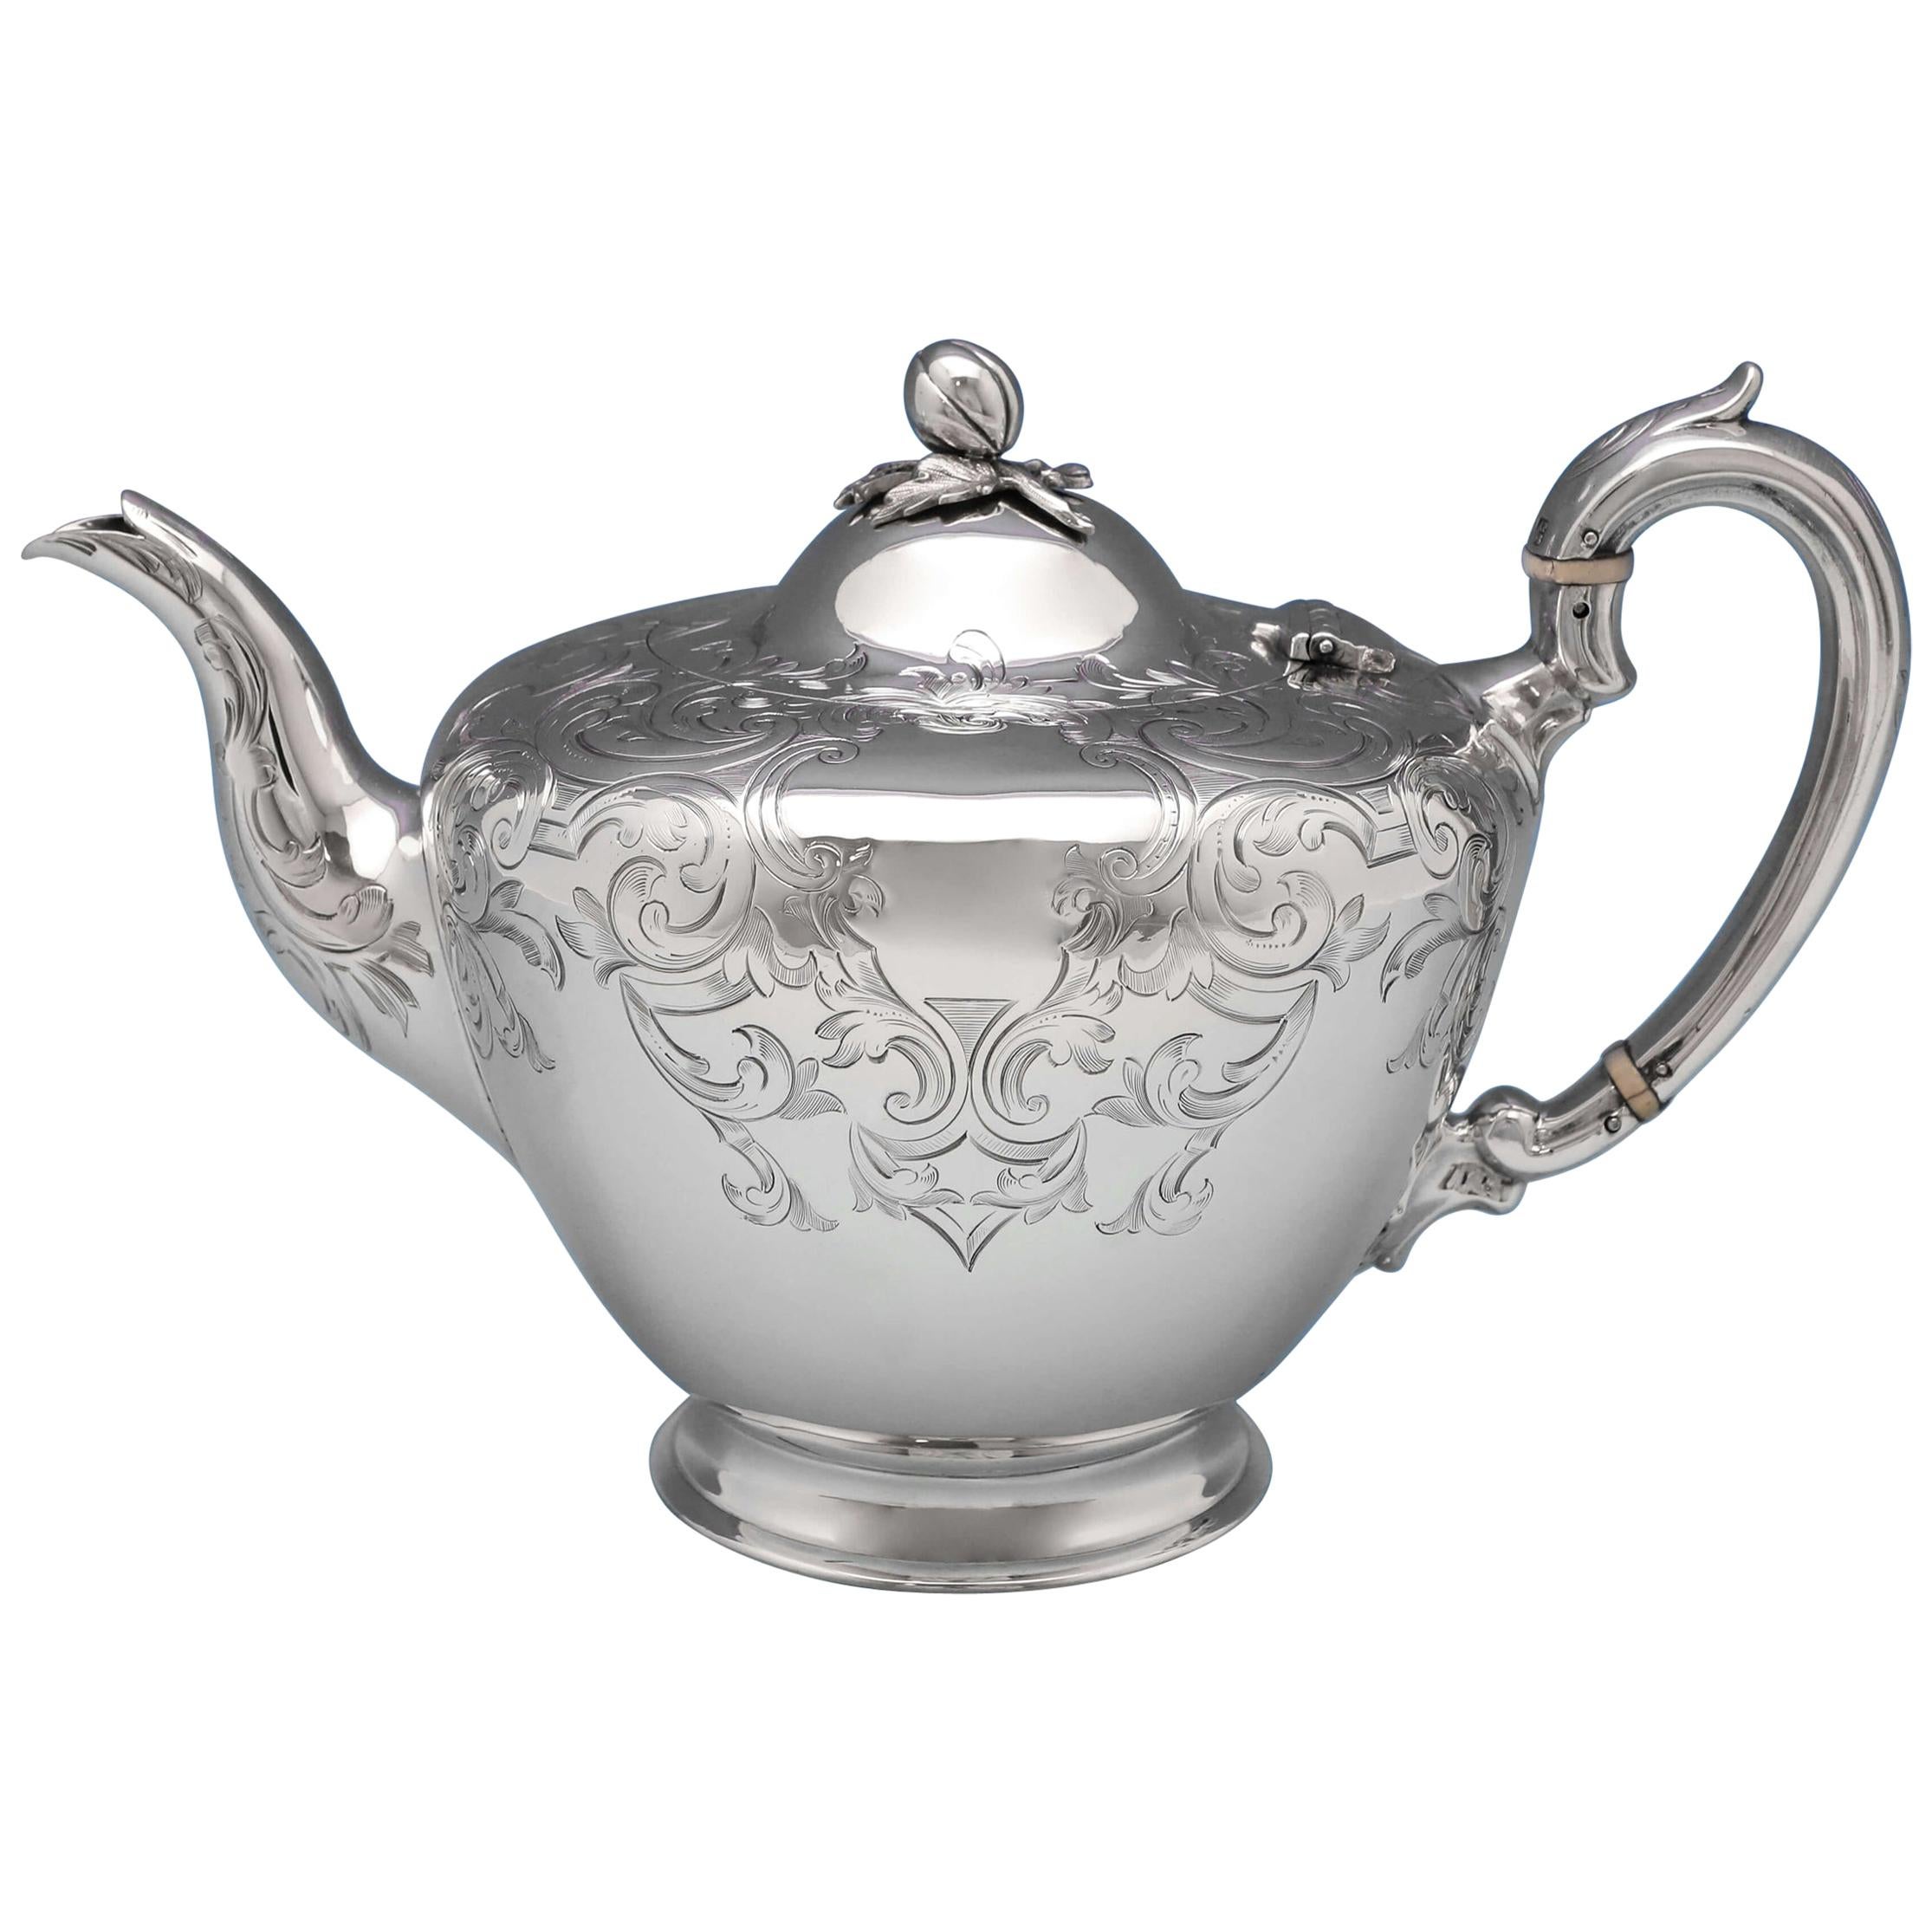 Victorian Engraved Antique Sterling Silver Teapot London 1850 Burrows & Pearce